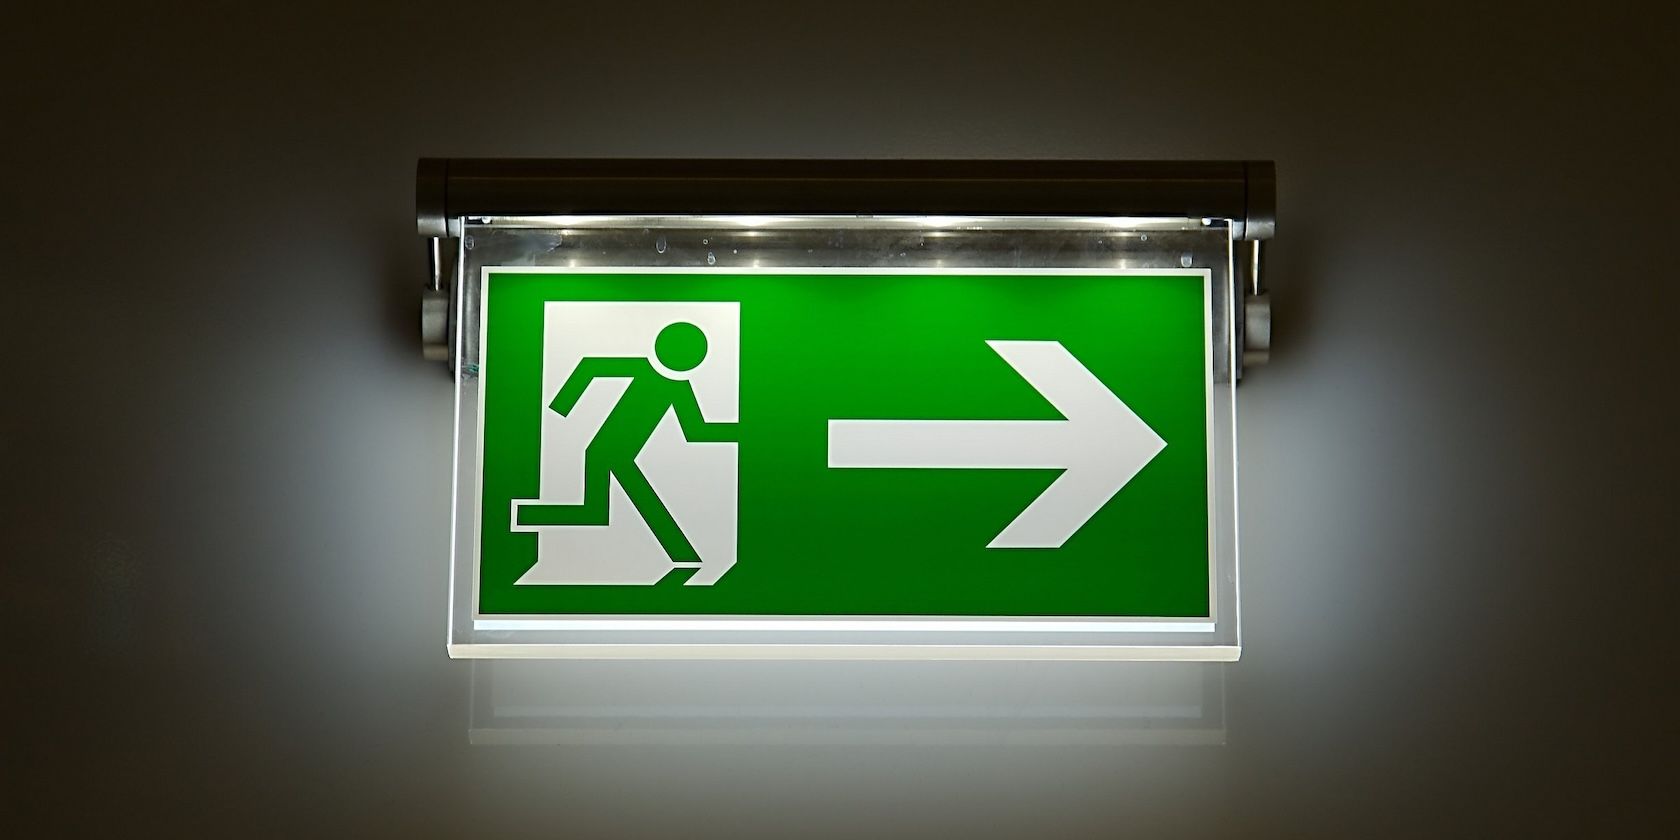 A green and white exit sign shows a stick figure leaving through a door with a large arrow pointing to the right.